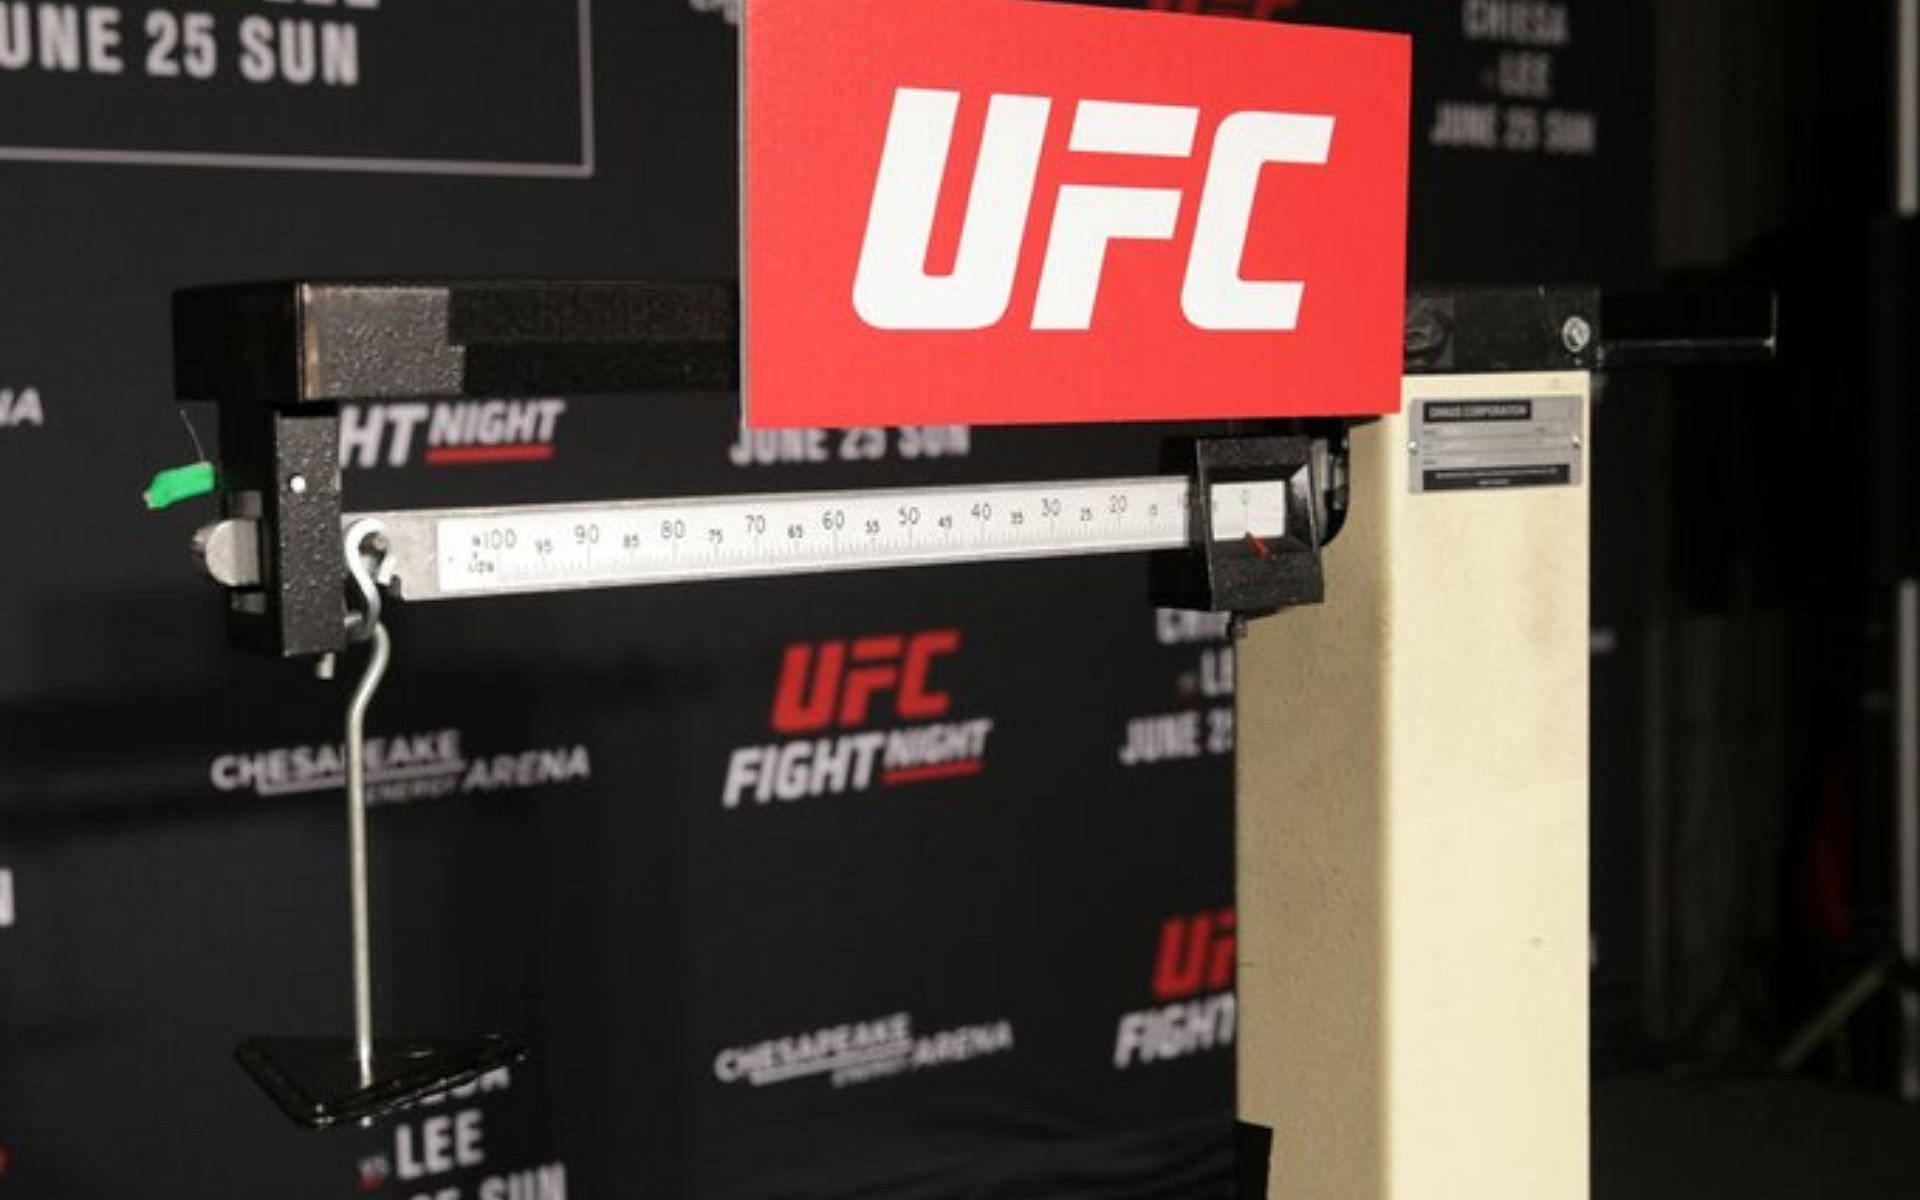 The UFC weigh-in scale (Image credits @ULTfightFANS Twitter)